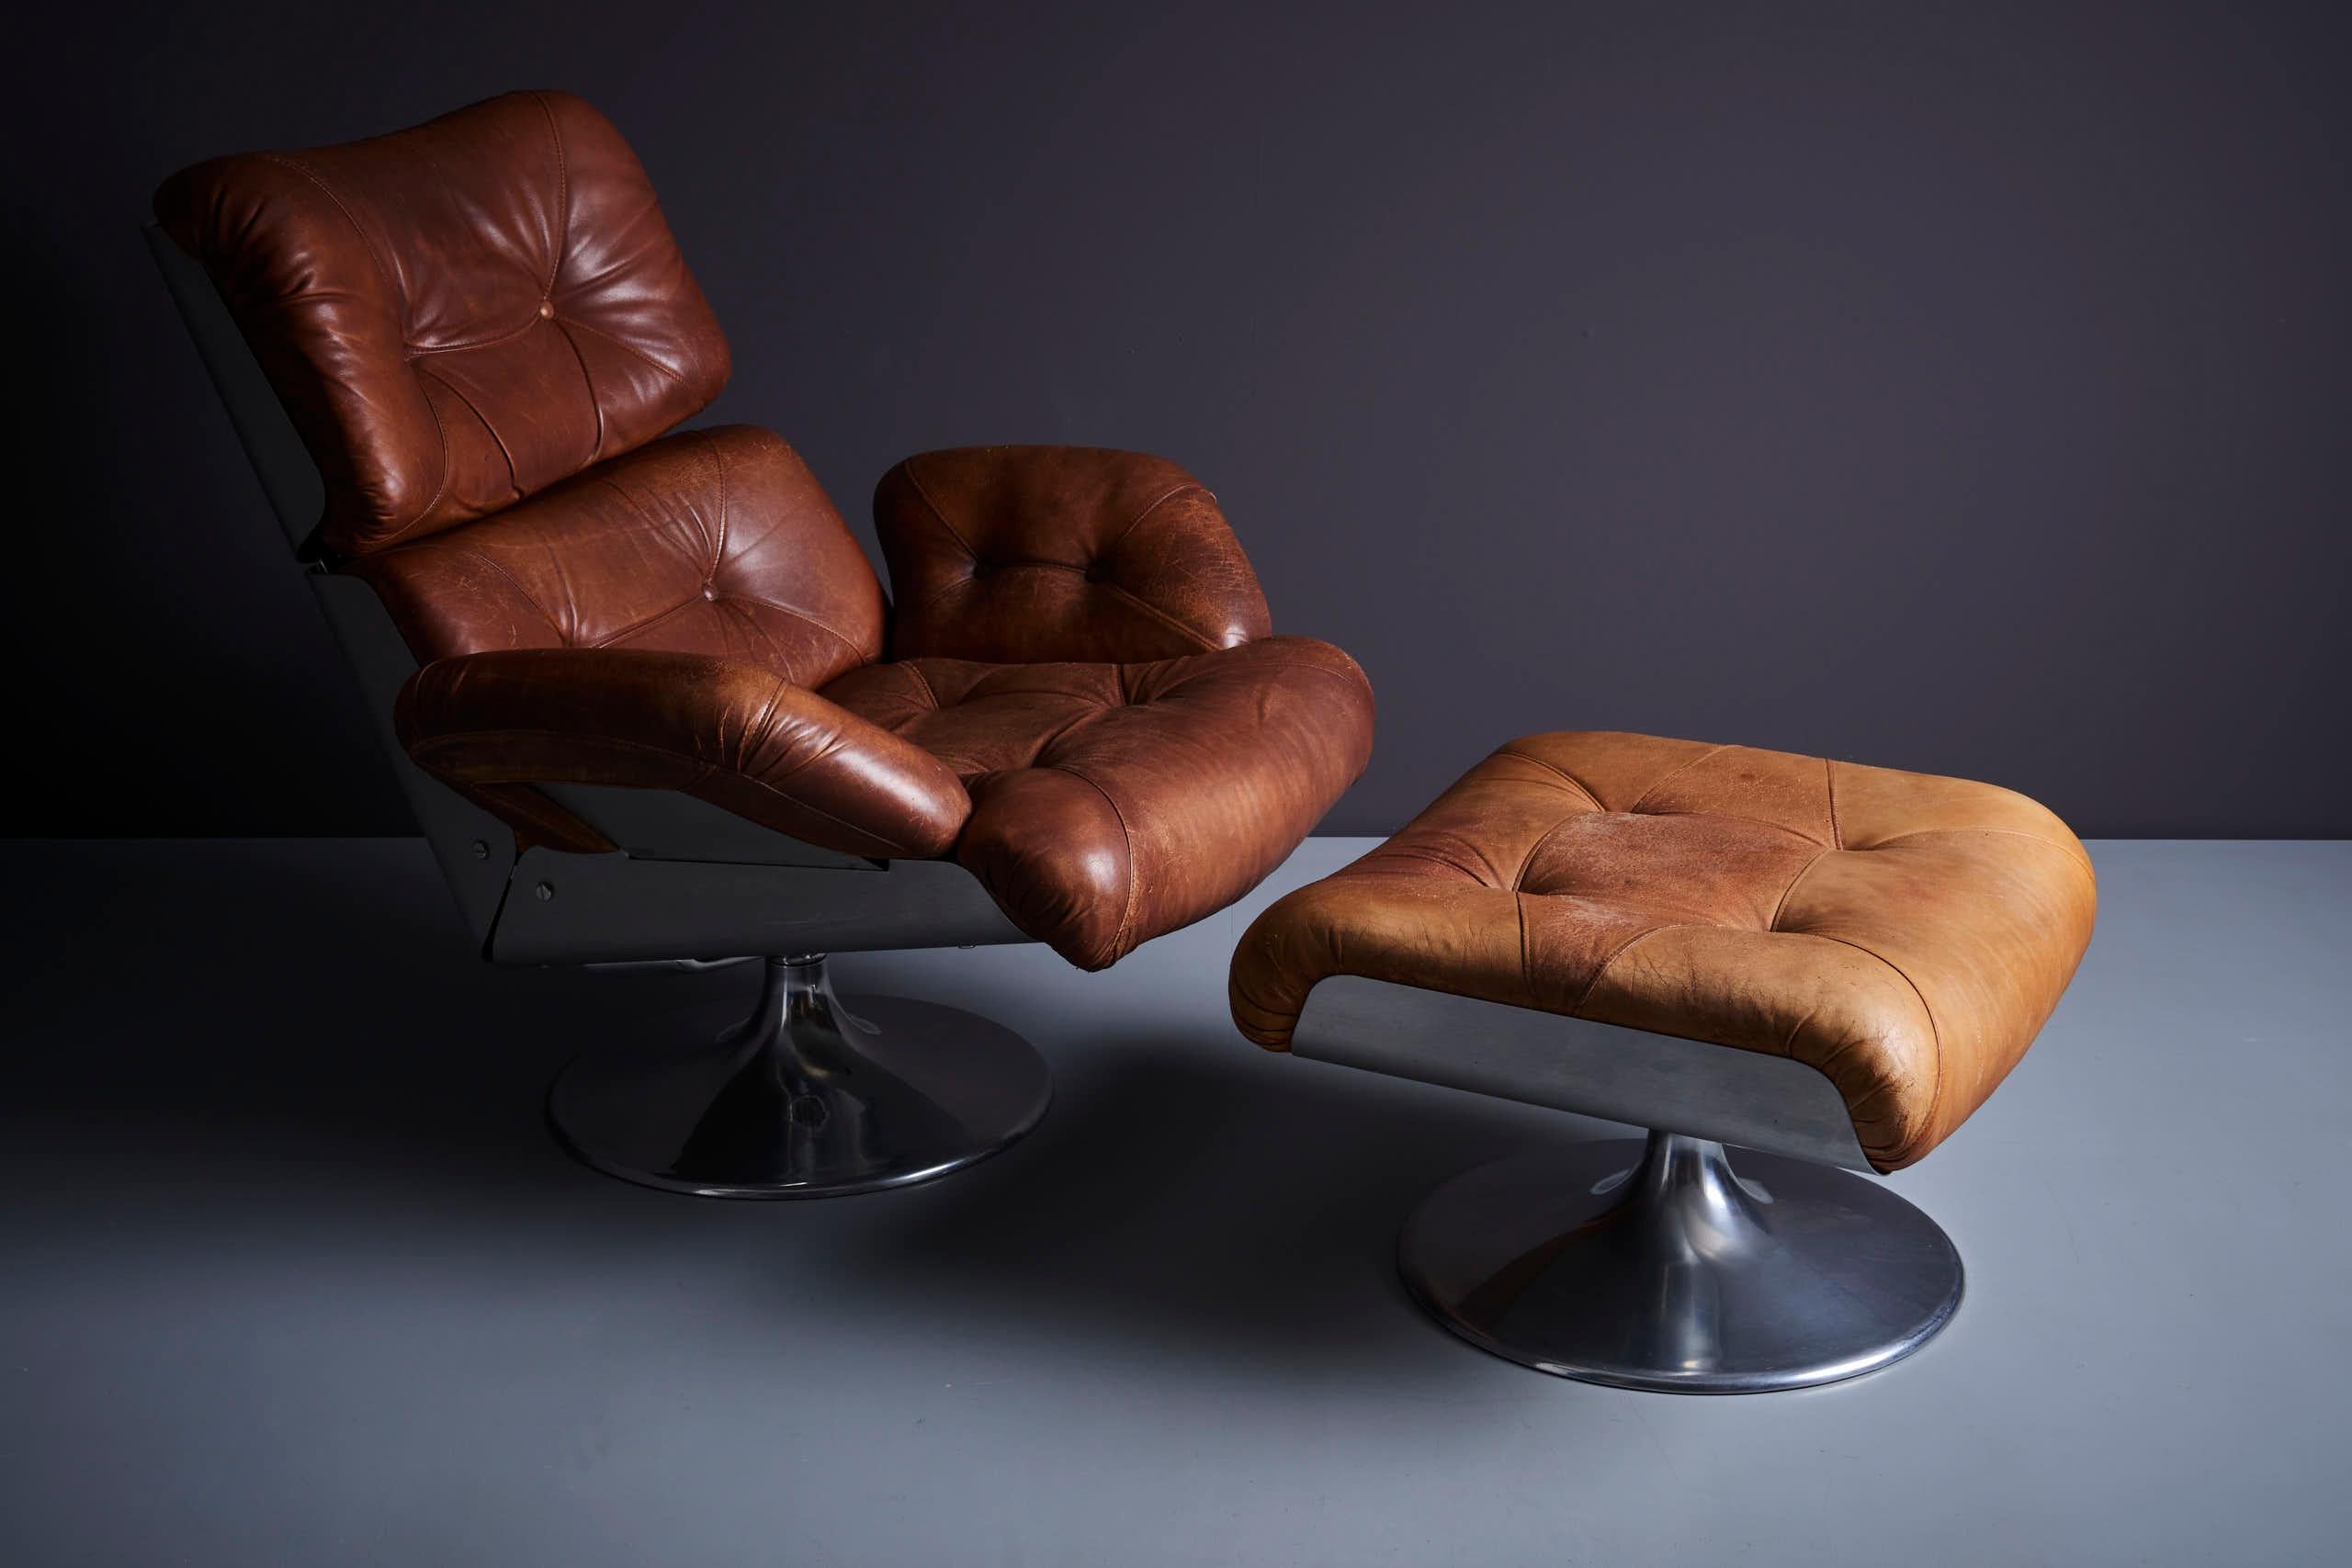 Xavier Feal Lounge Chair in Inox and Leather with Ottoman, France - 1970s. The measurements given apply to the Lounge Chair. The ottoman measures 61 x 61 x 40cm. 